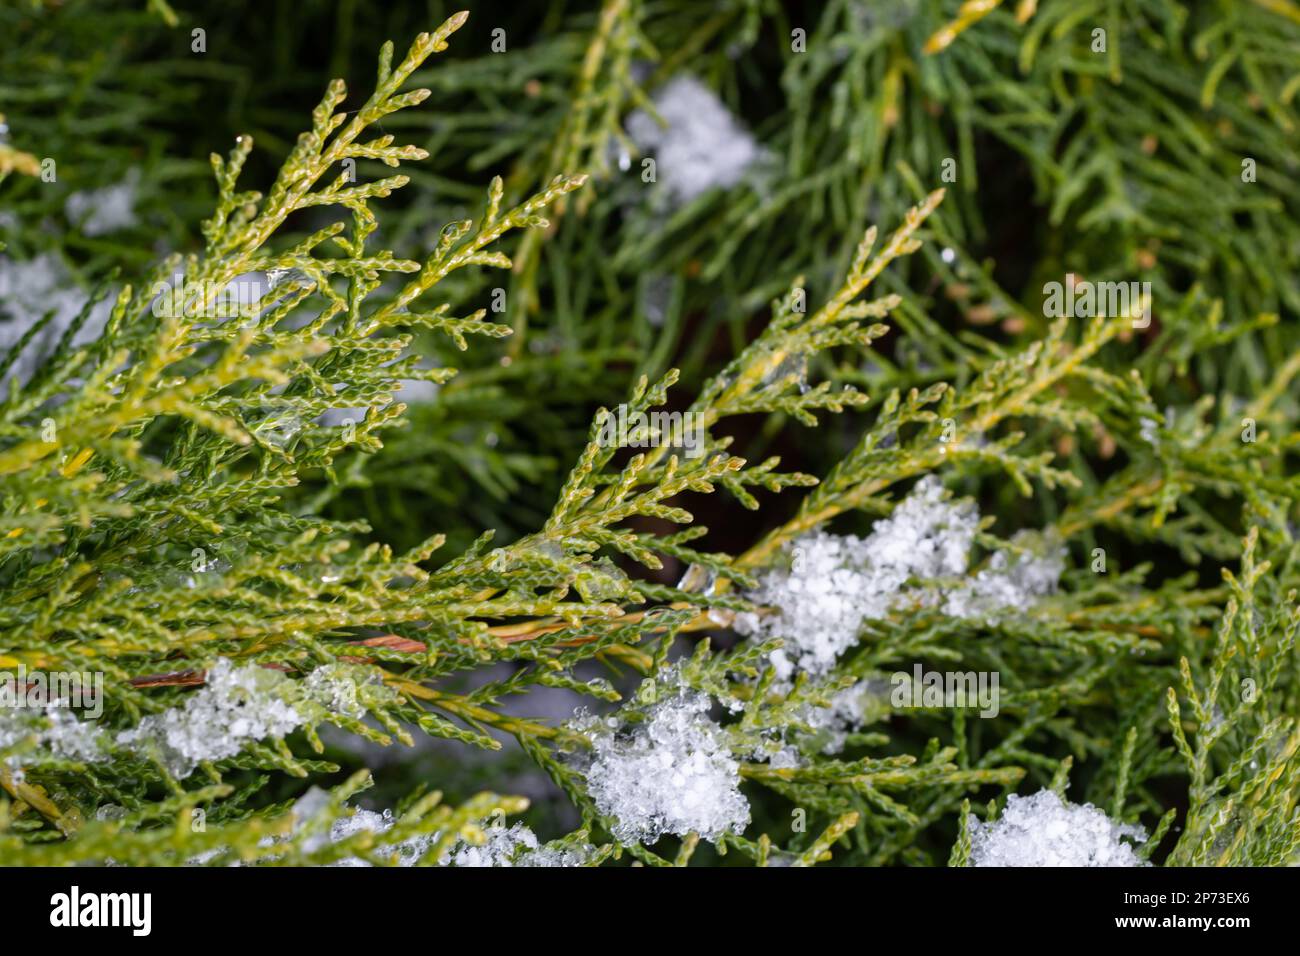 beautiful snow-covered green thuja branches. Green plant winter background. Stock Photo